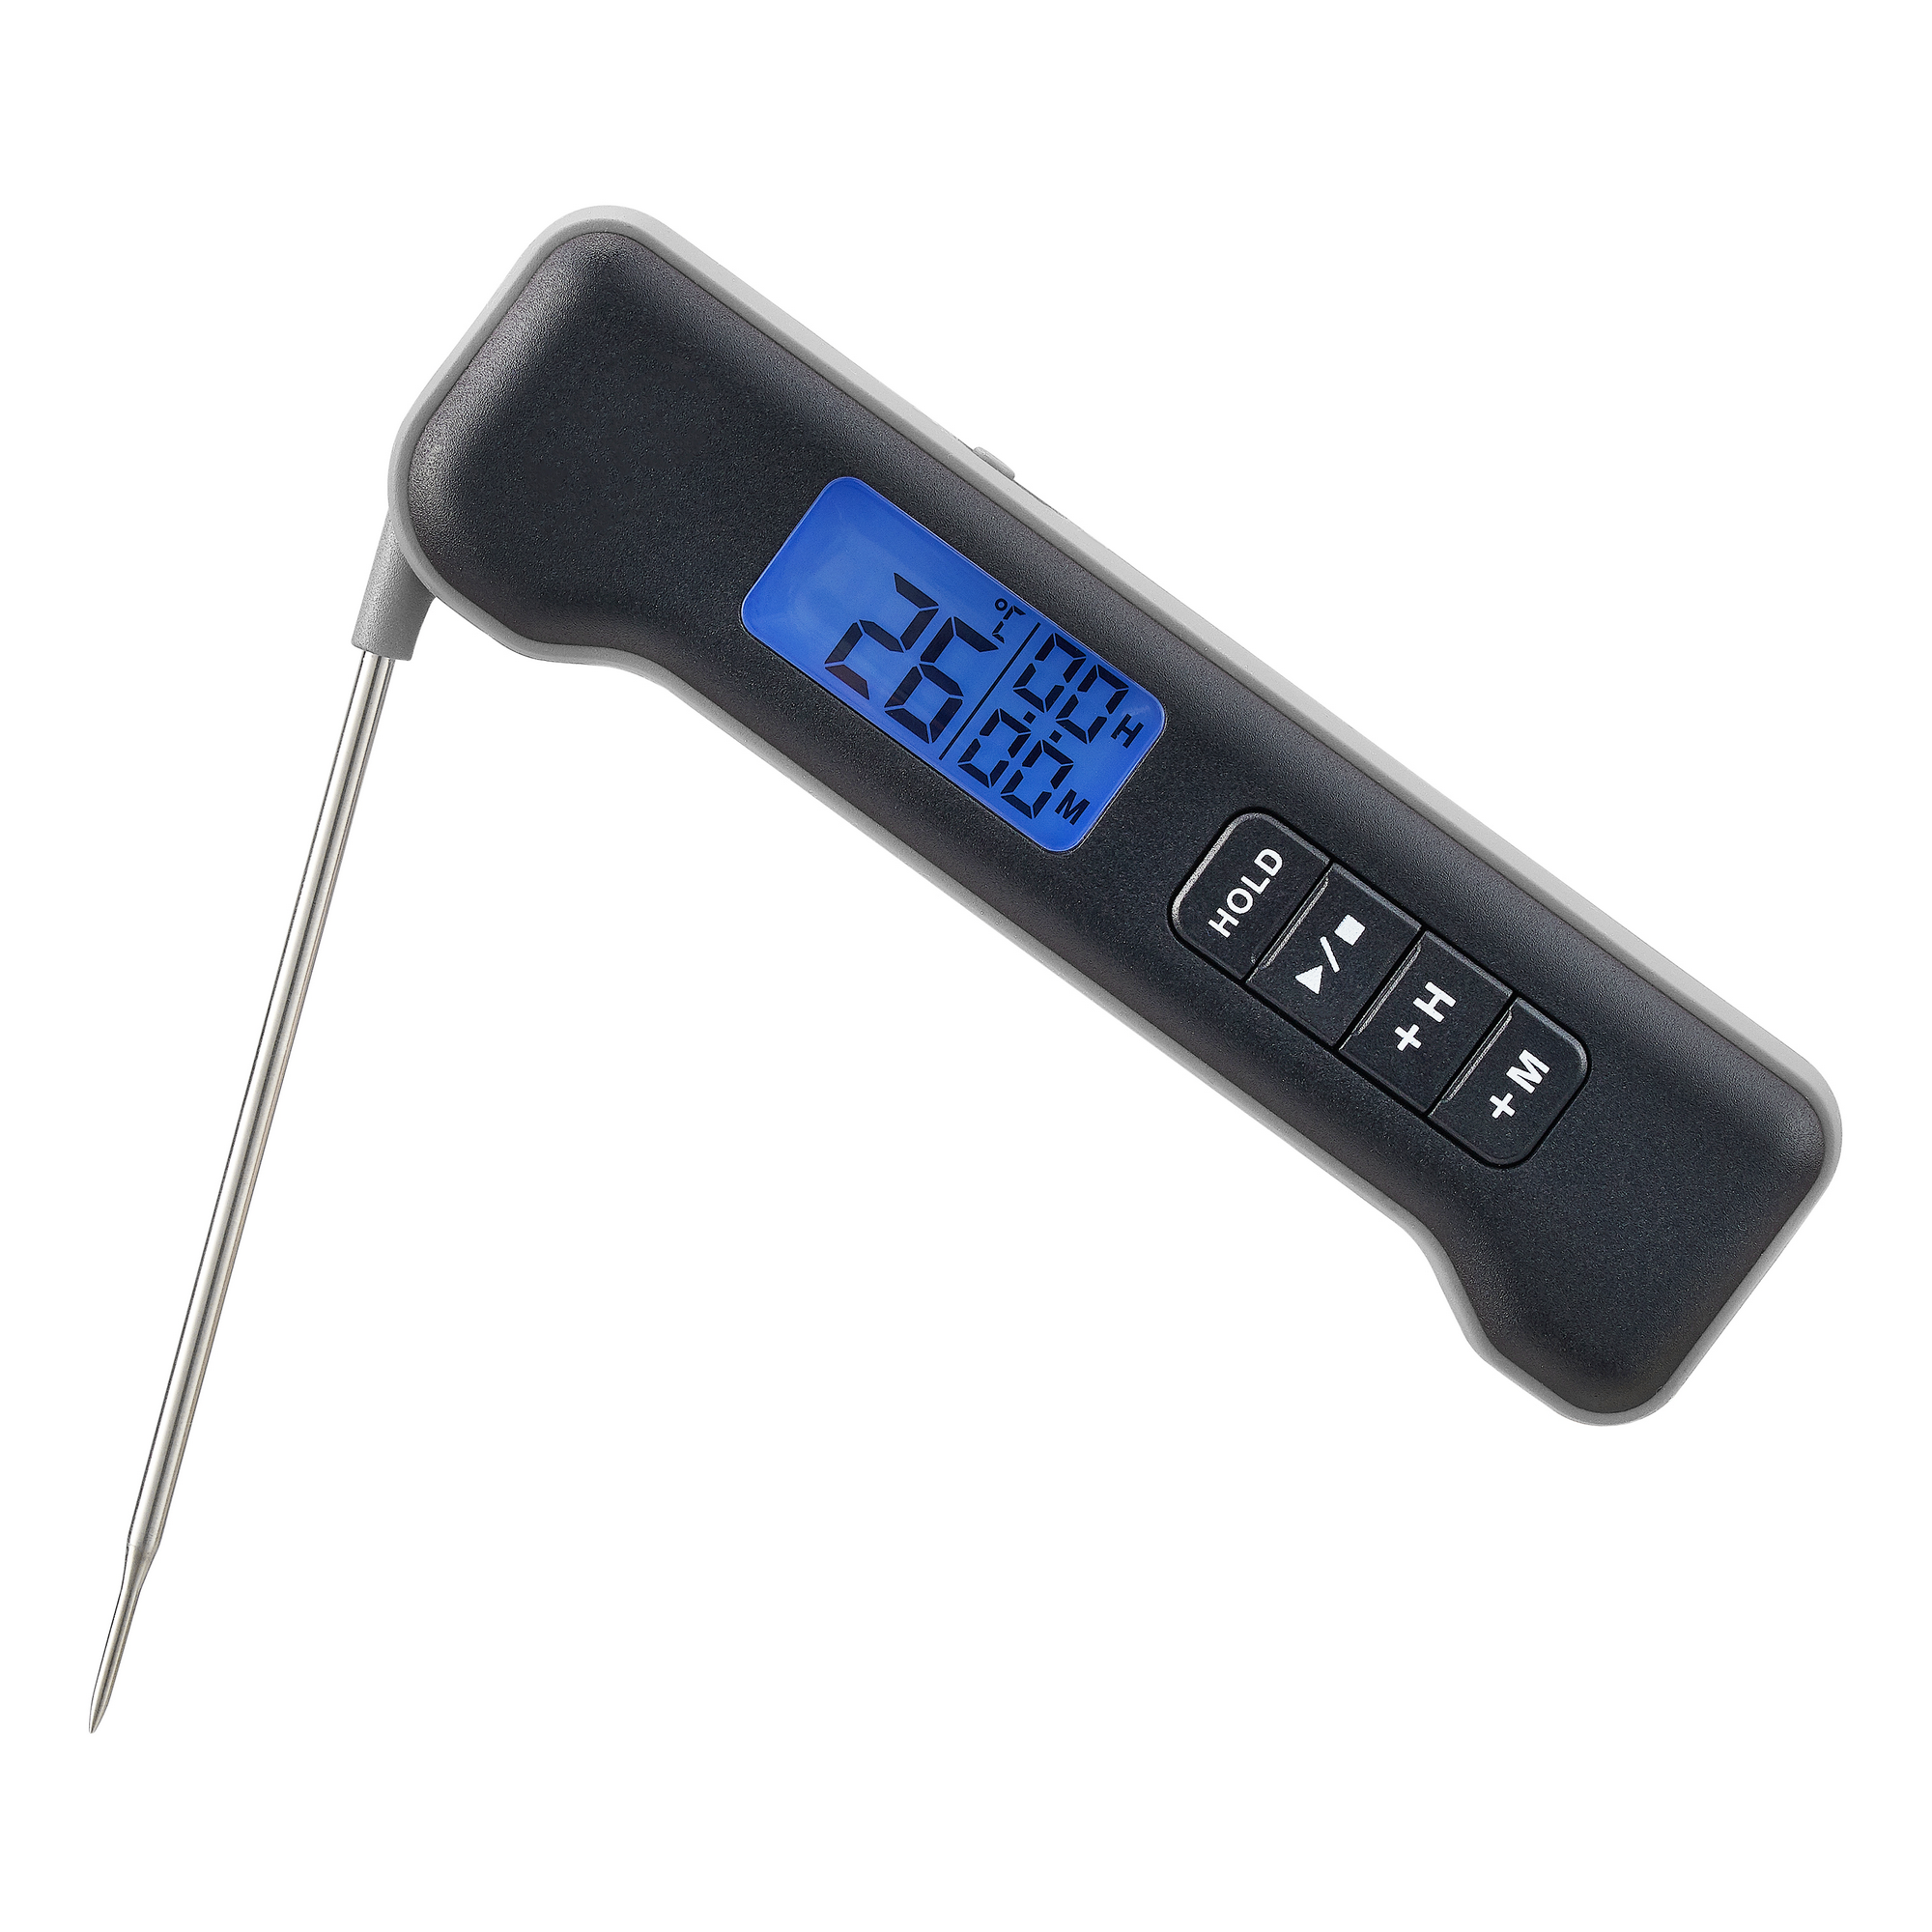 Grillthermometer klappbar mit LCD-Display + product picture